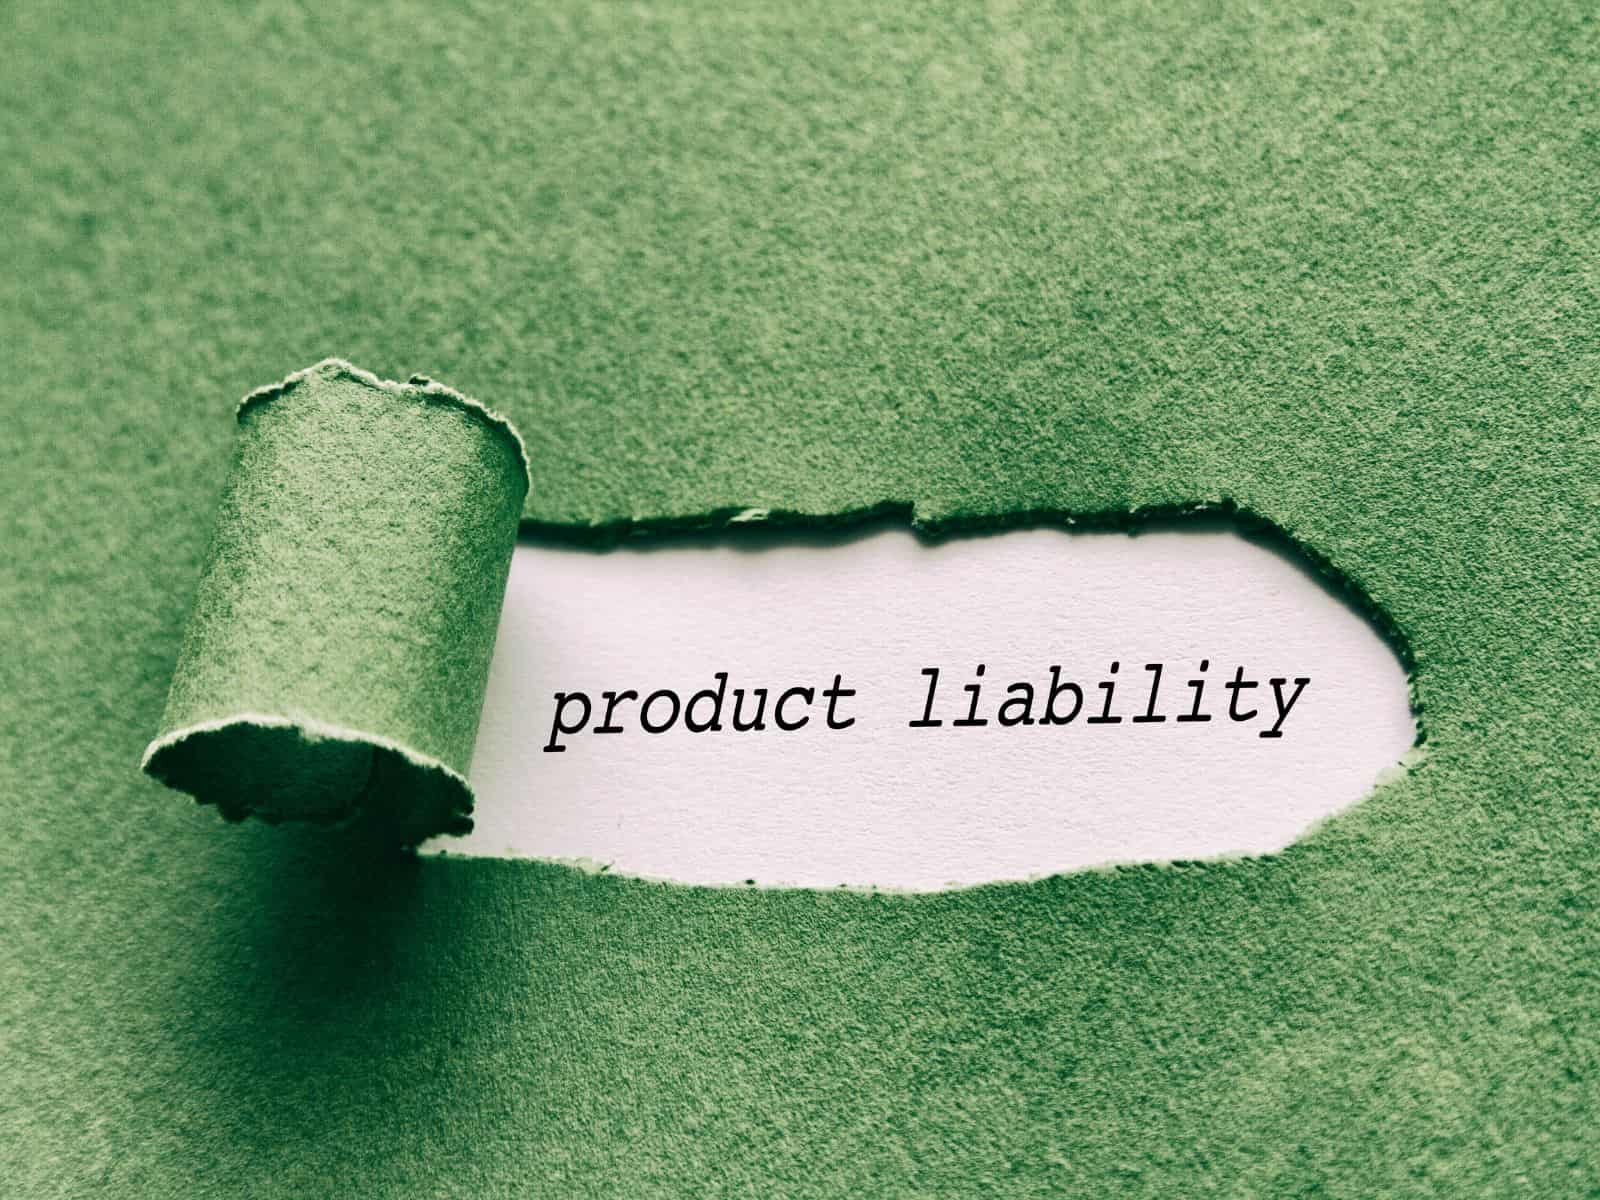 What is the Cost of Product Liability Insurance Policy?